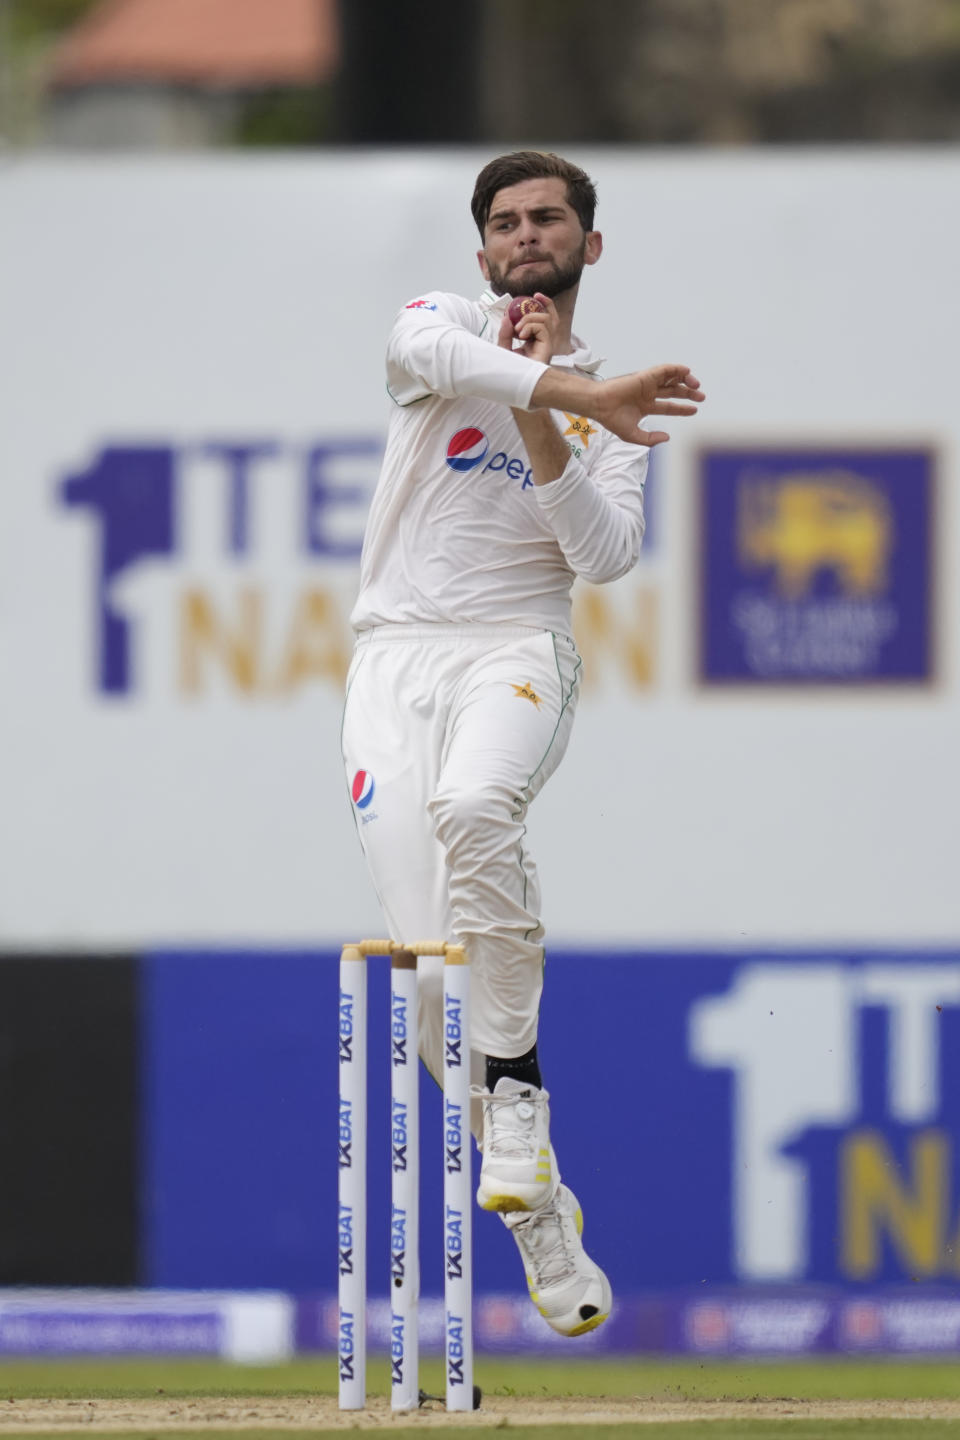 Pakistan's Shaheen Shah Afridi delivers ball during the day one of the first test cricket match between Sri Lanka and Pakistan in Galle, Sri Lanka on Sunday, July 16, 2023. (AP Photo/Eranga Jayawardena)